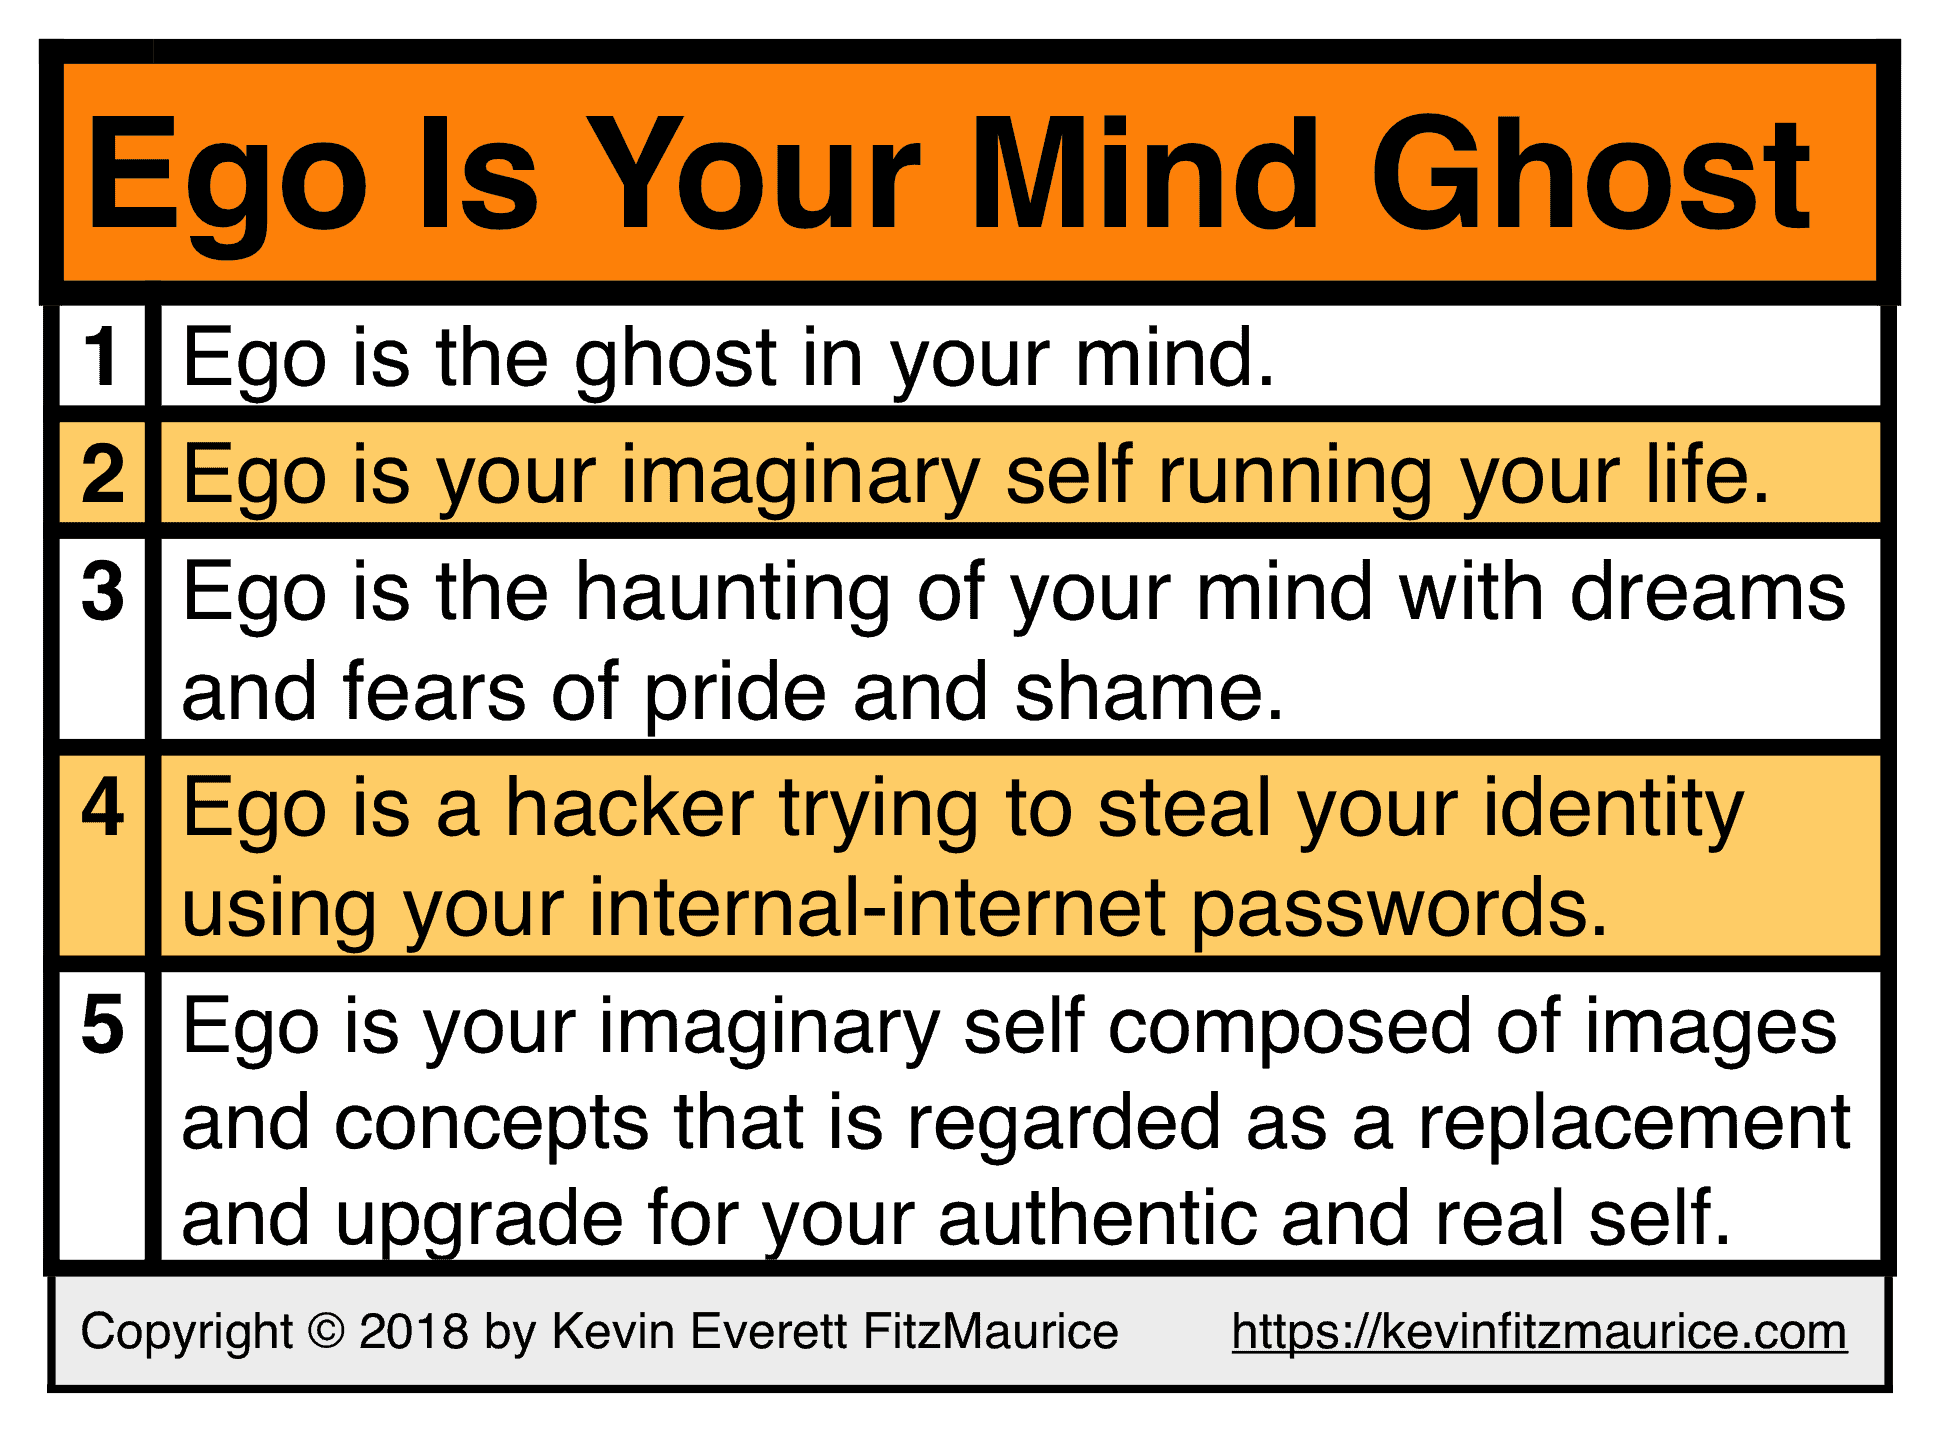 Ego Is the Ghose in Your Mind